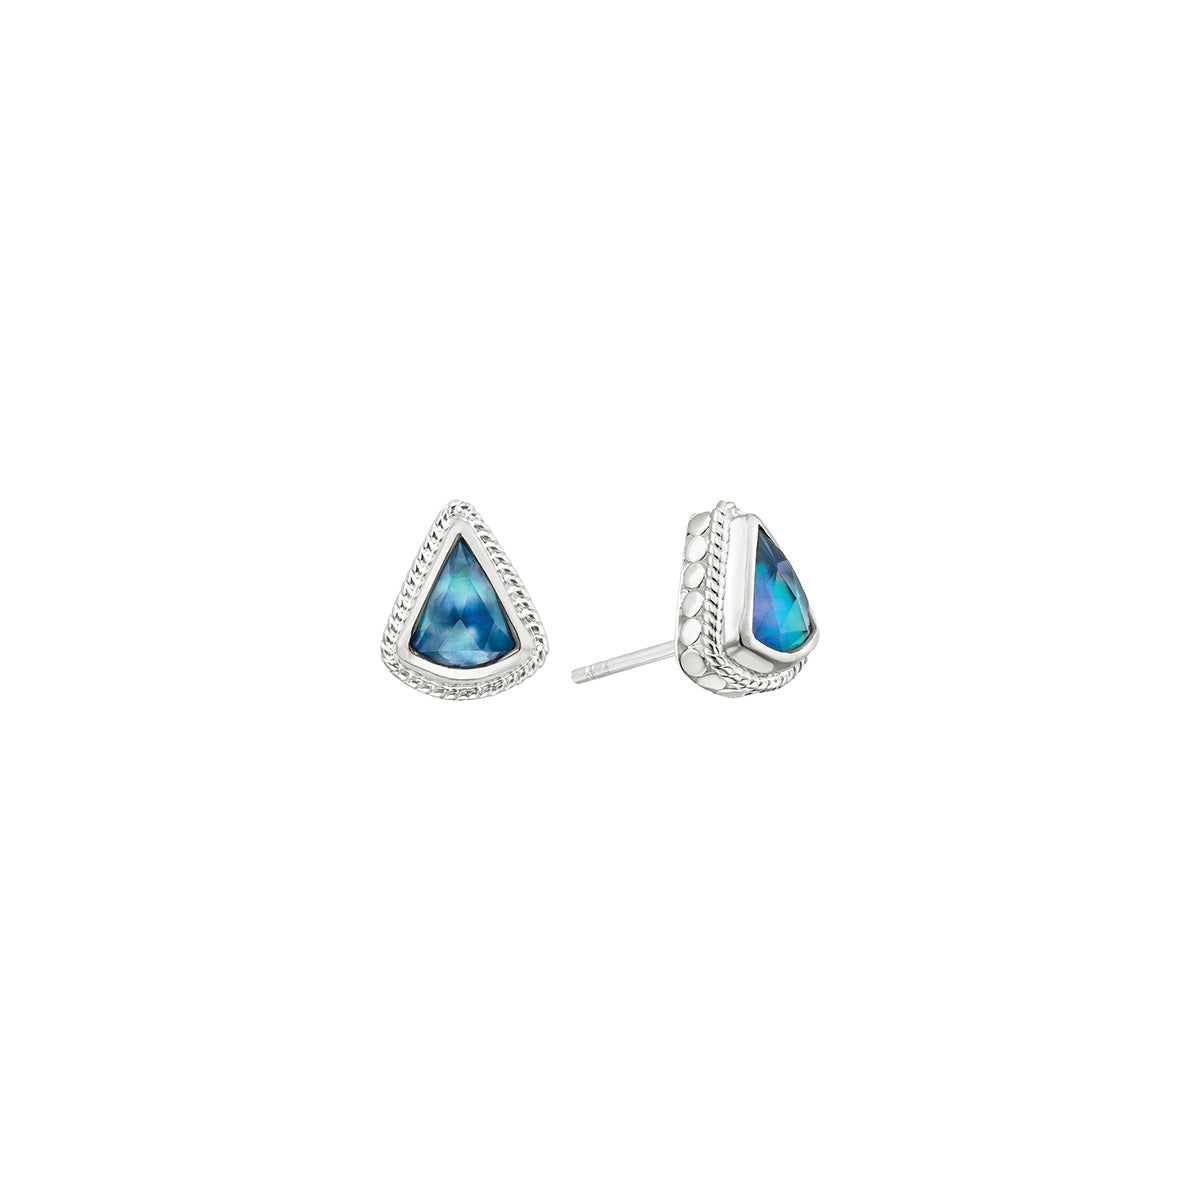 Ana Beck Sterling Silver Lapis Triangle Stud Earrings - Silver